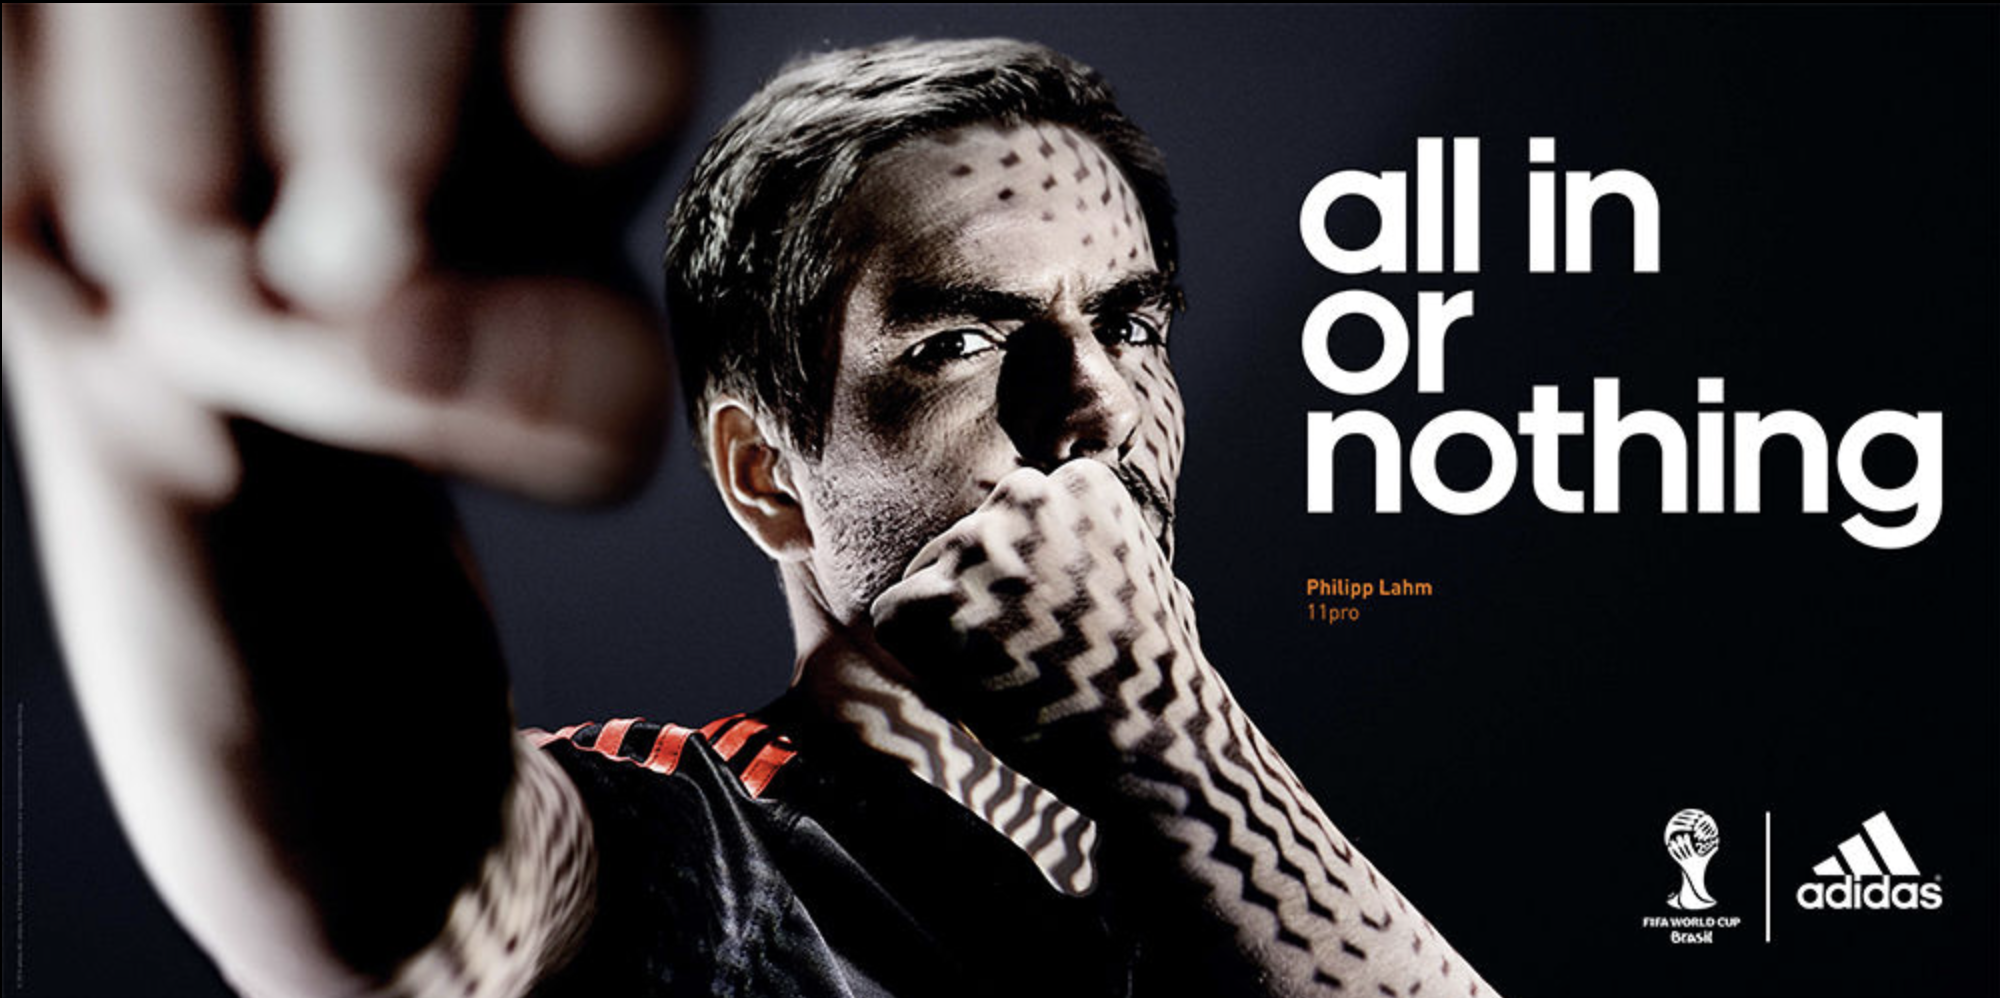 Adidas all in or nothing Campaign 2019 TOMOLONDON